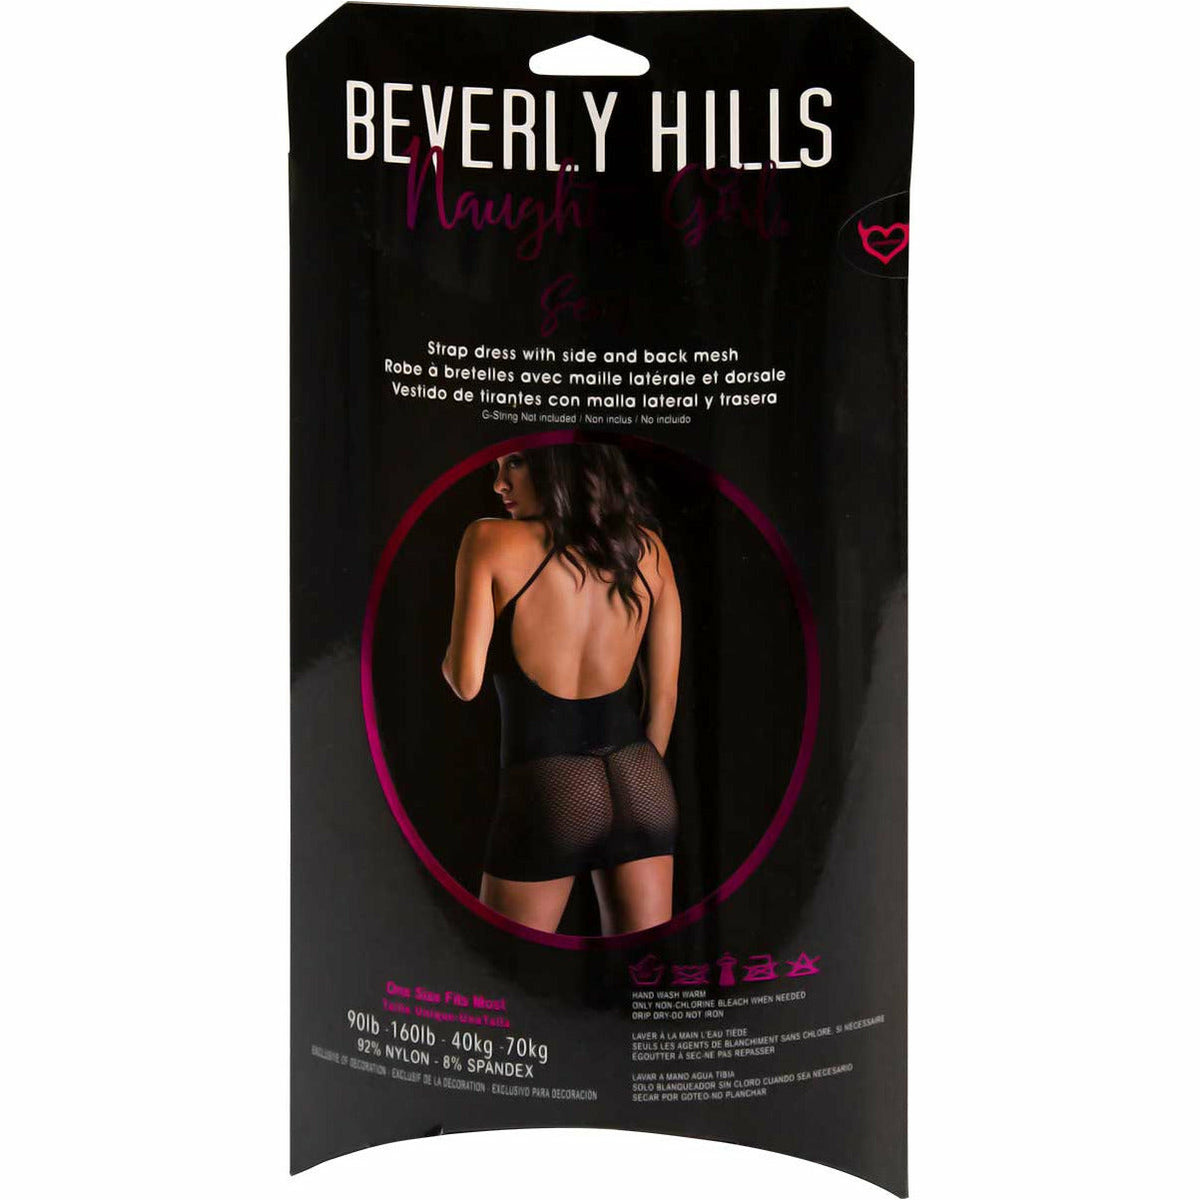 Beverly Hills Naughty Girl - Strappy Dress with Mesh Accents - Black - One Size